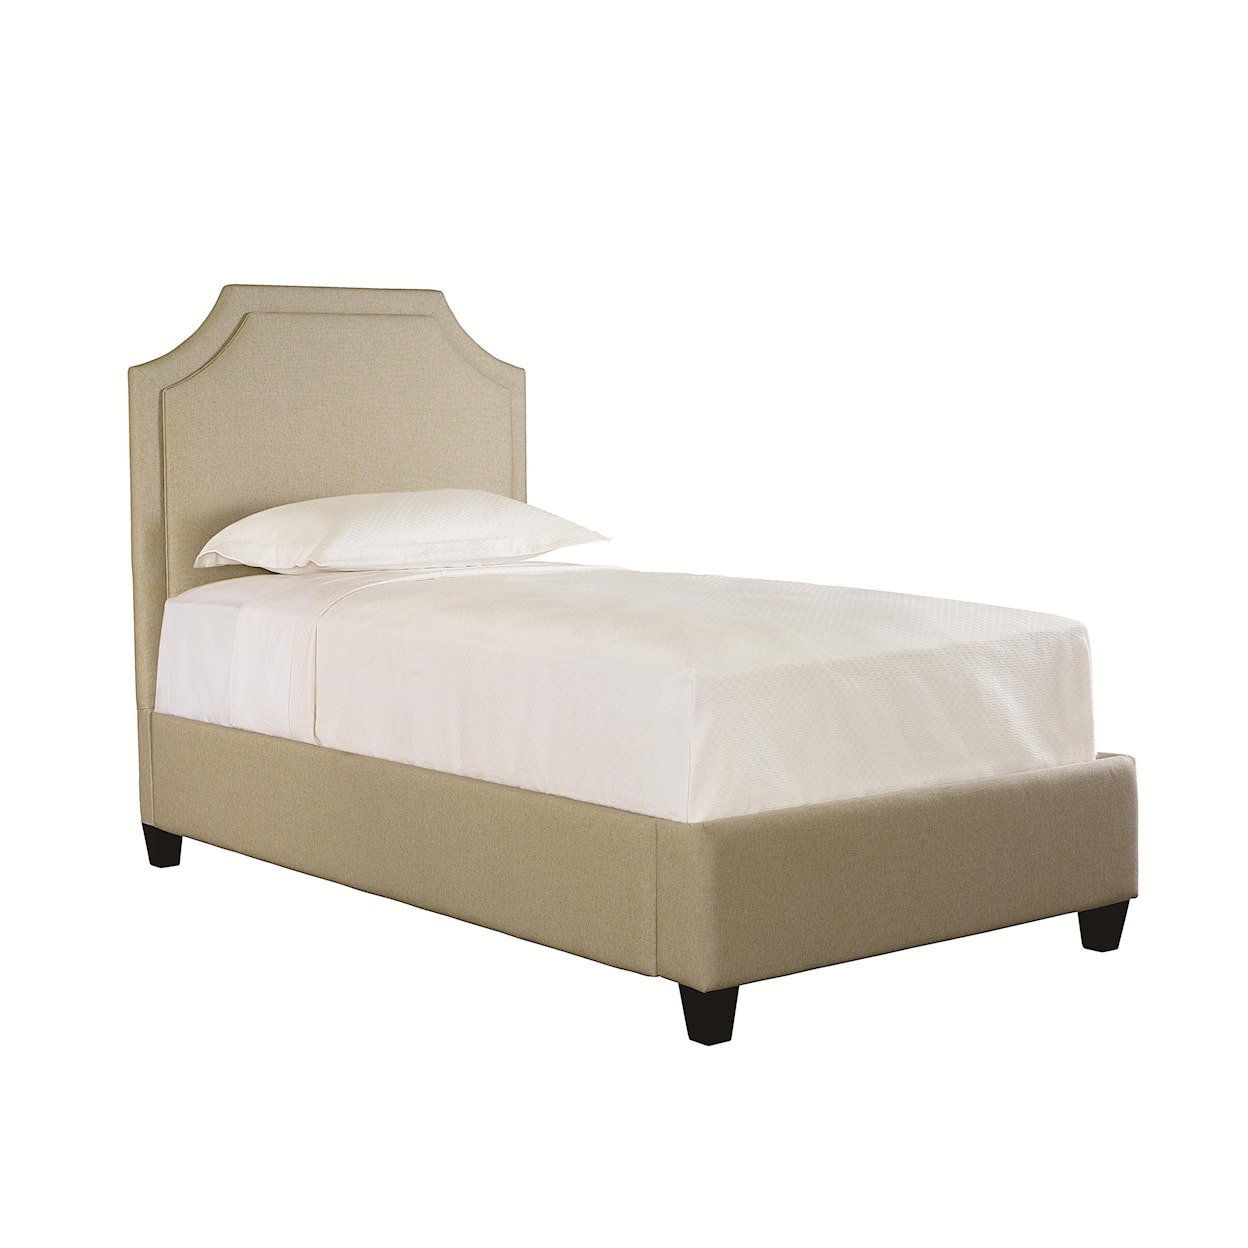 Bassett Custom Upholstered Beds King Florence Upholstered Bed with Low FB 